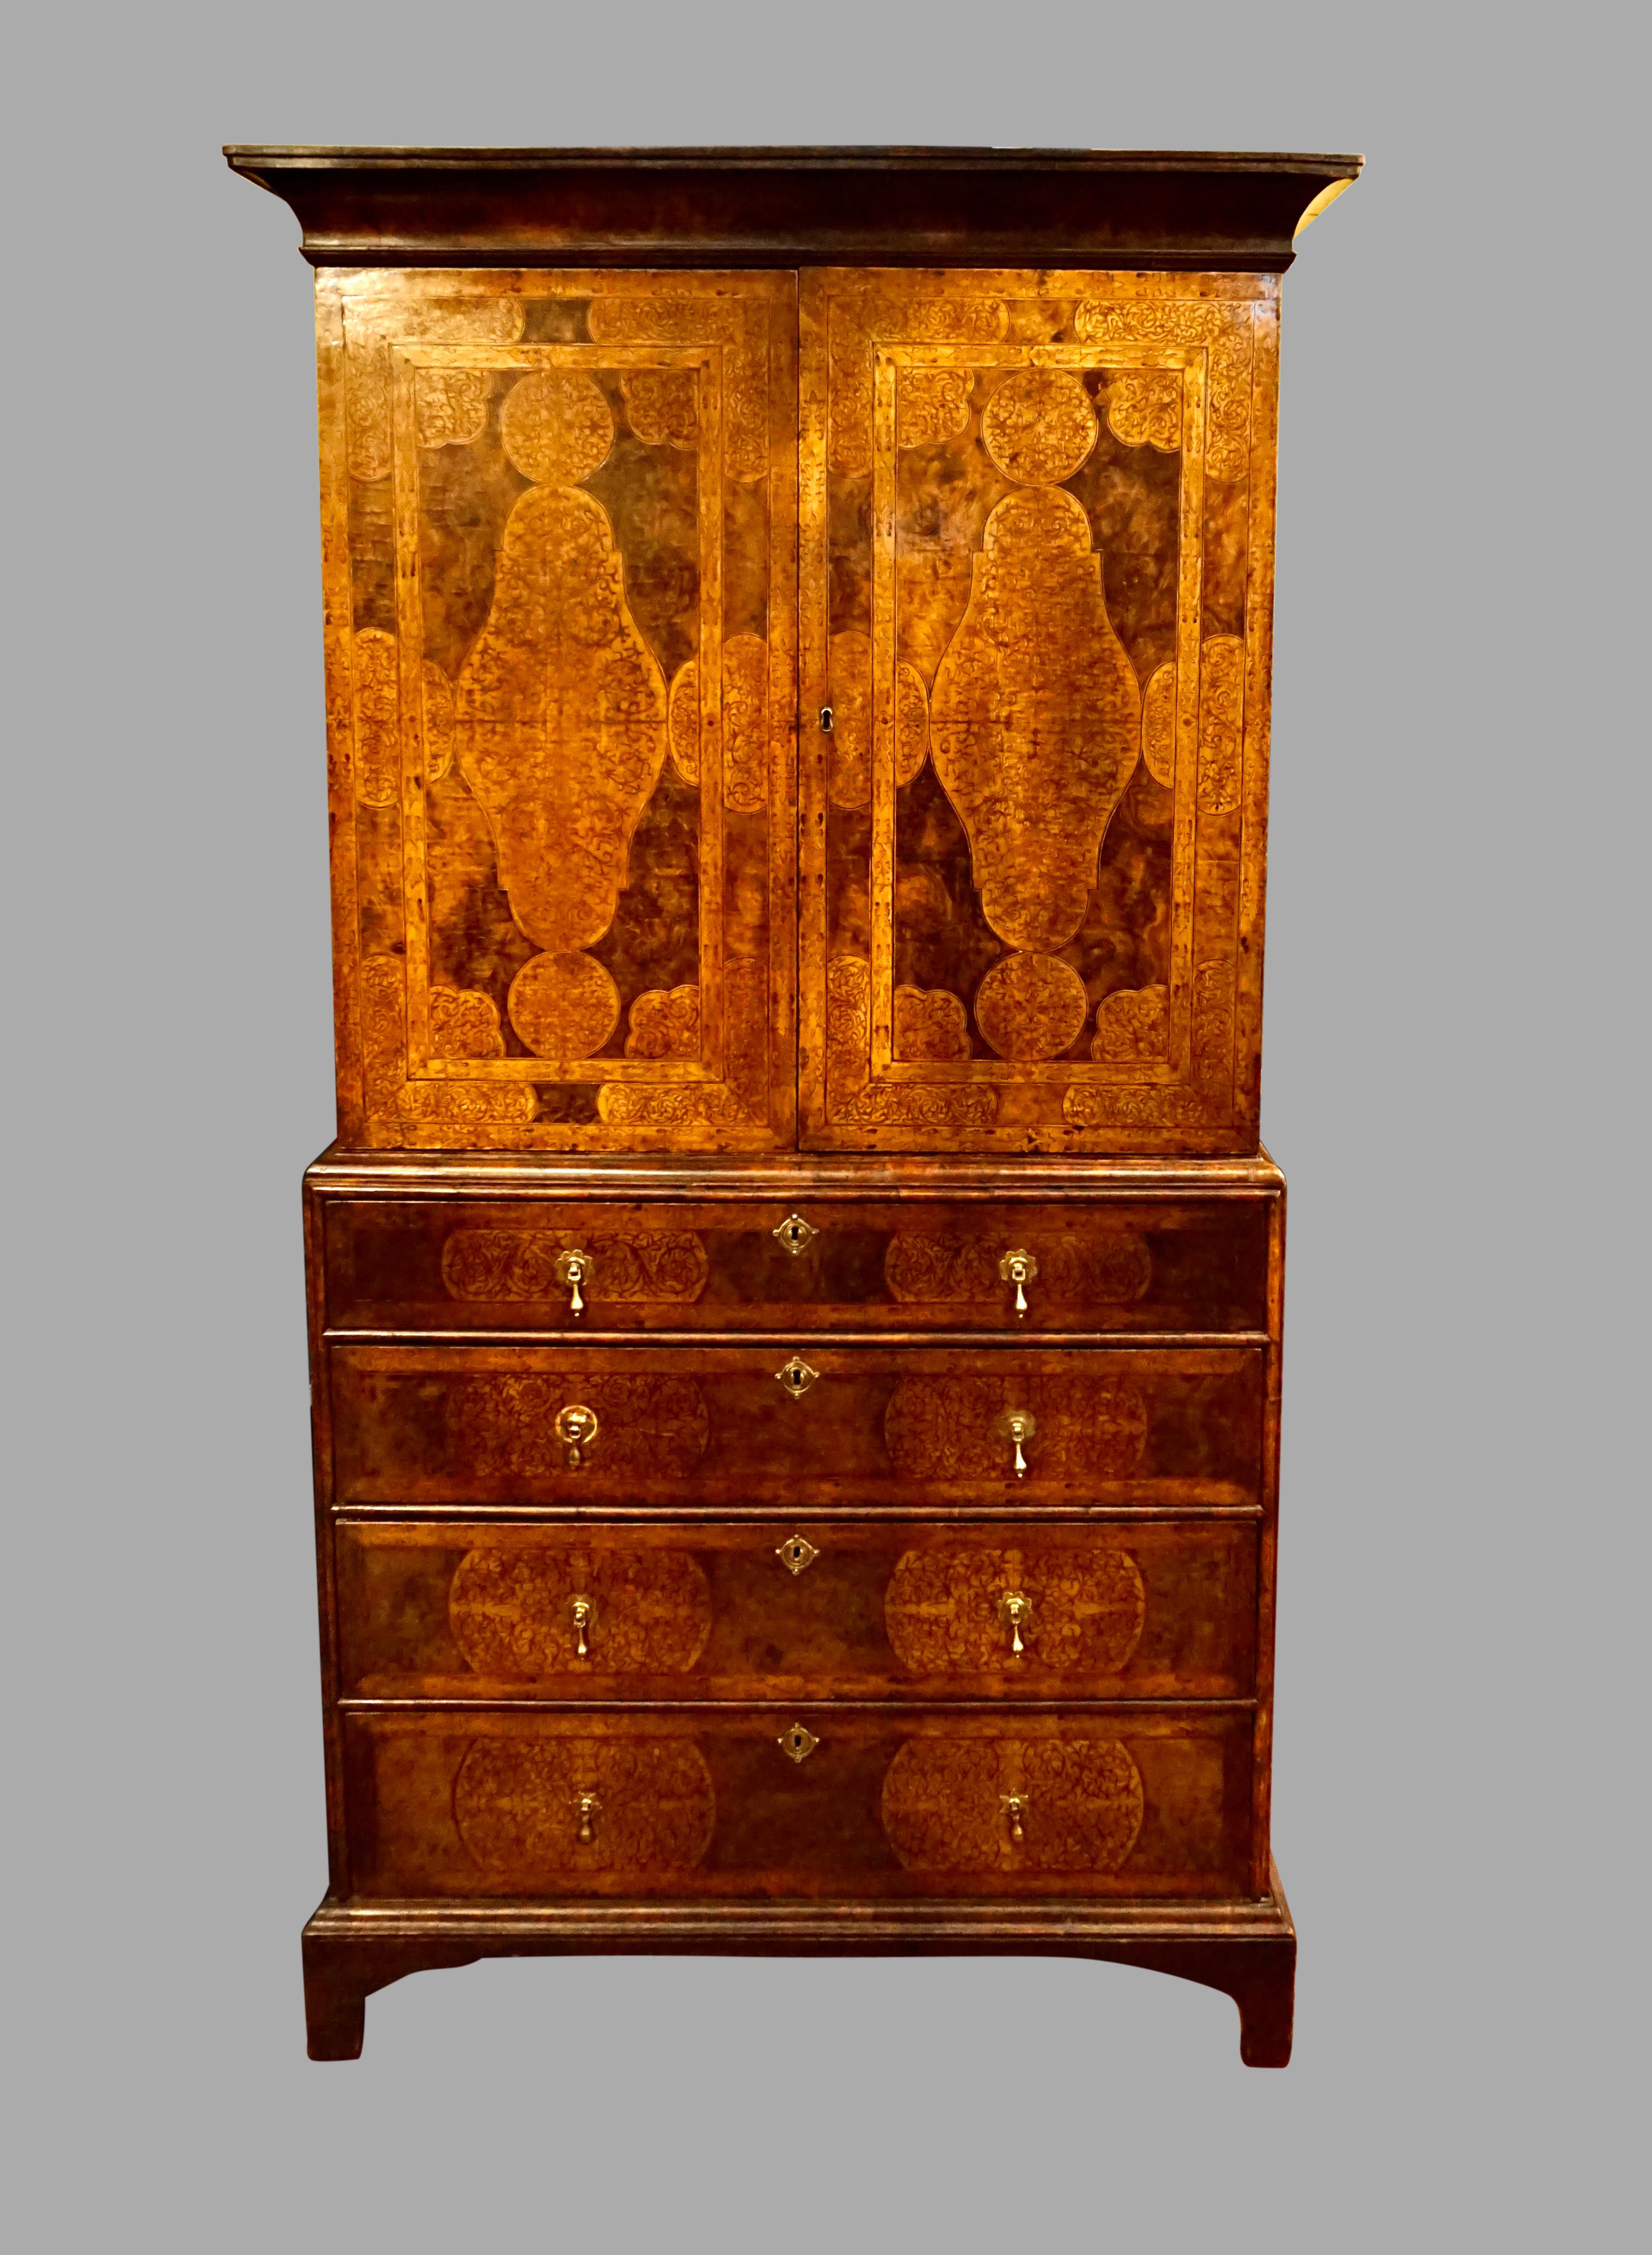 Fine Queen Anne Period Seaweed Marquetry Inlaid Walnut Cabinet-on-Chest  In Good Condition For Sale In San Francisco, CA